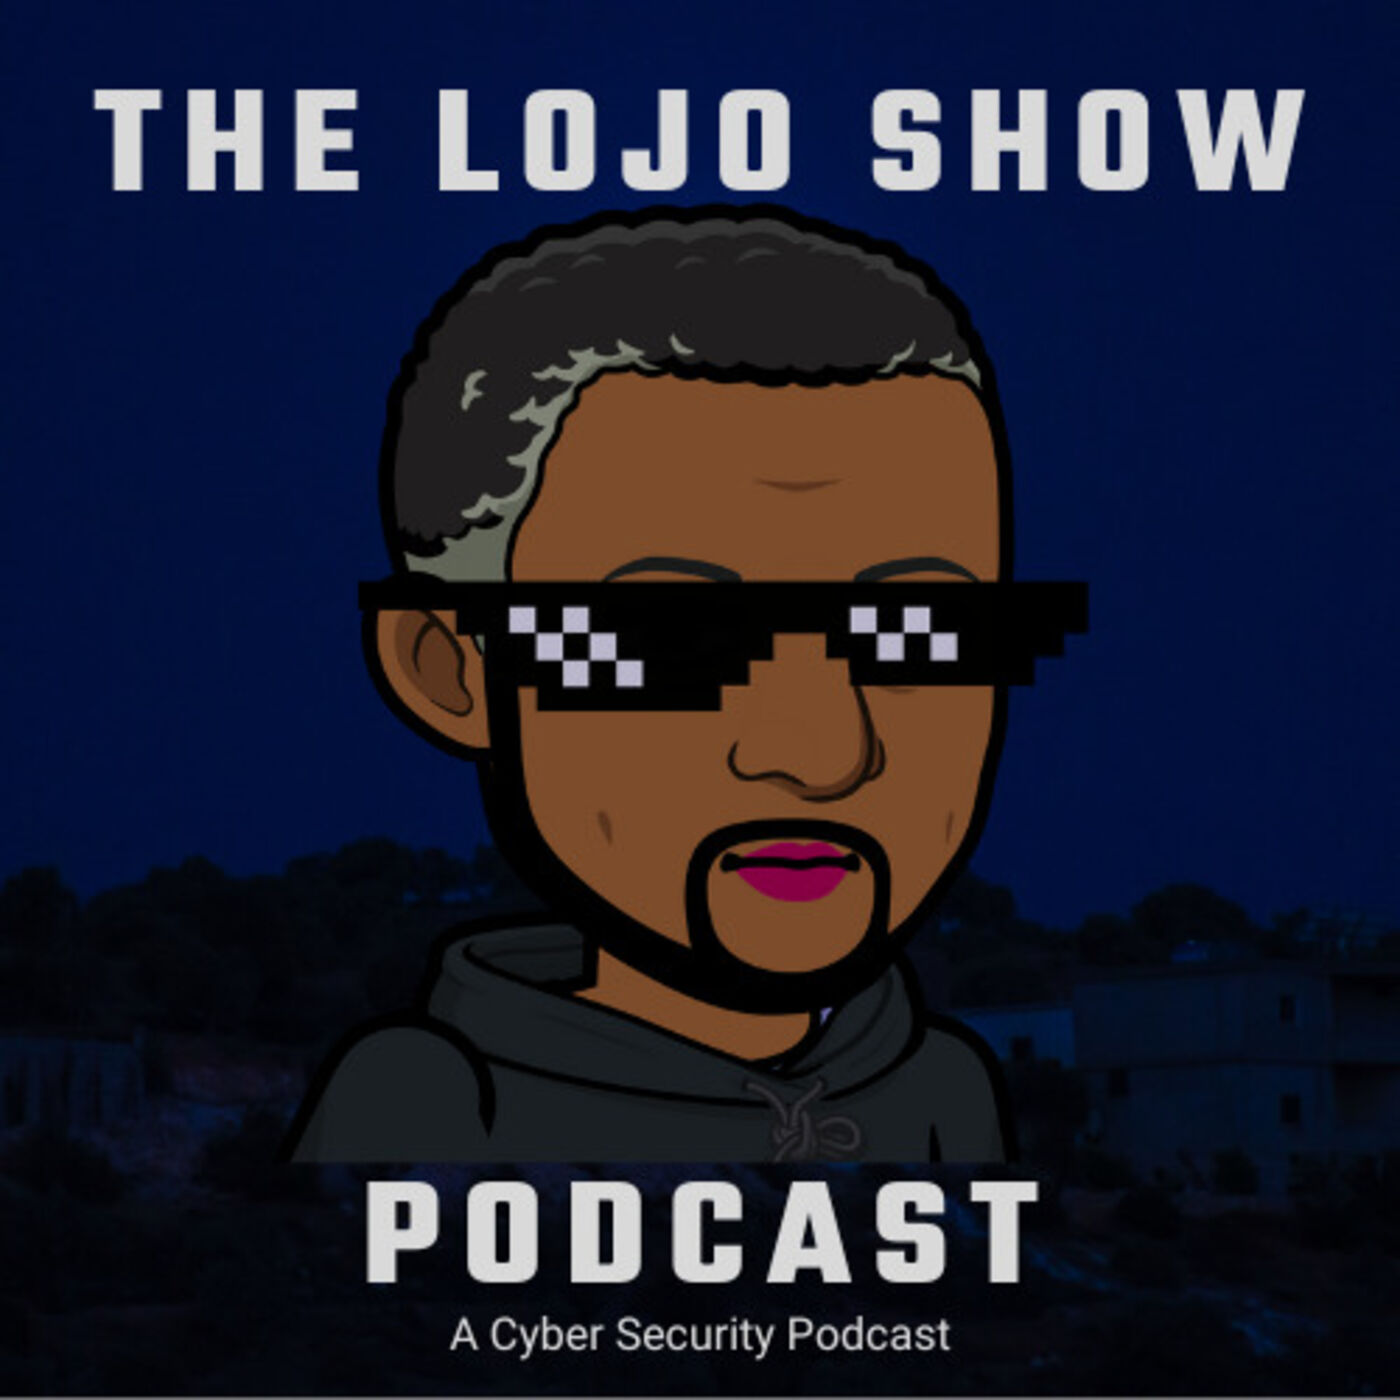 The CyBUr Guy and LoJo Show Podcast Collaboration Conversation